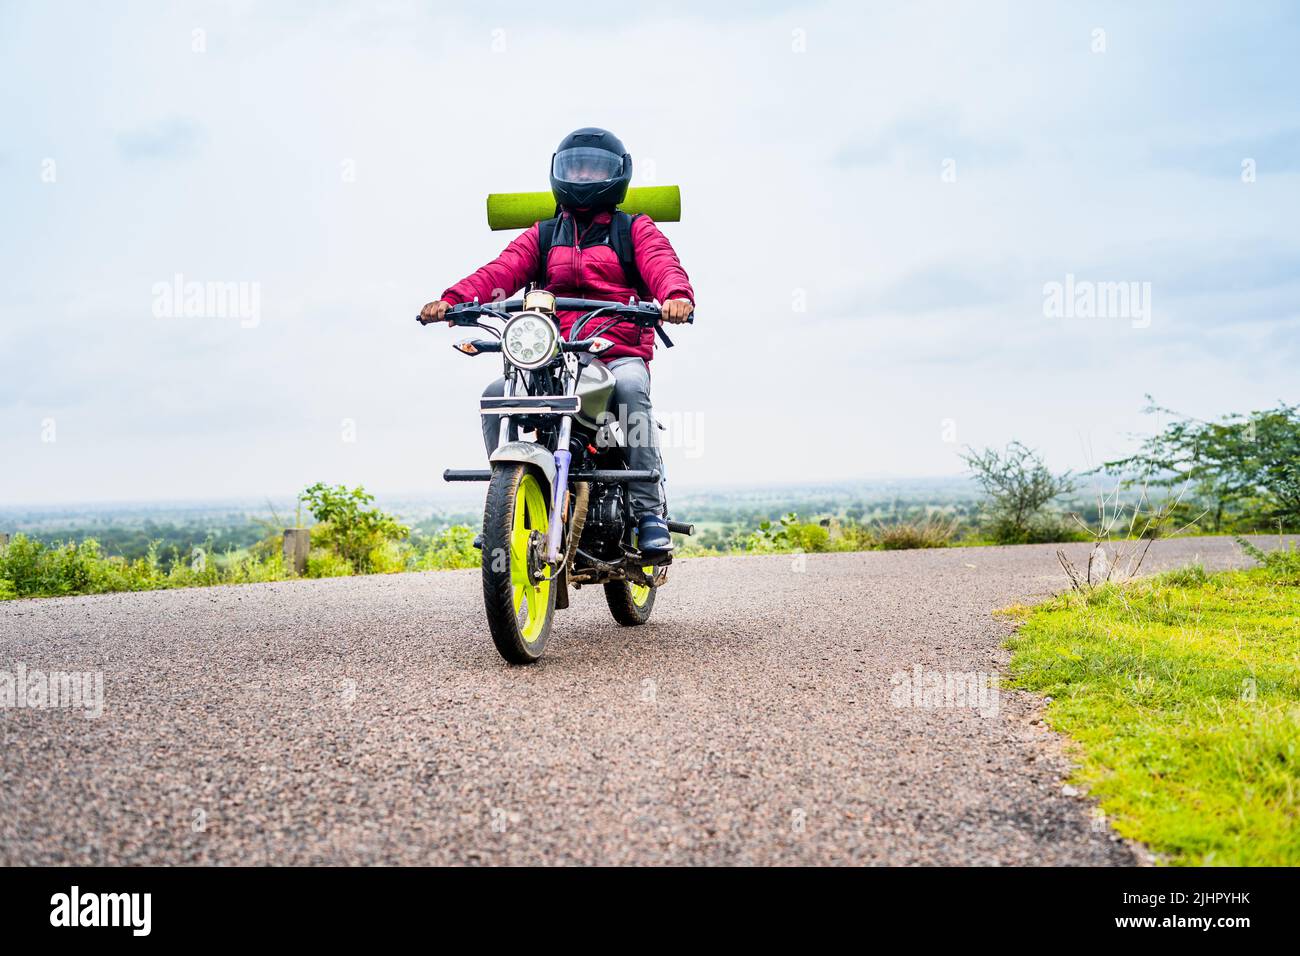 motorbke Rider with backpack traveling on motorbike near mountains on road - concept of freedom, weekend holidays and outdoor activities Stock Photo